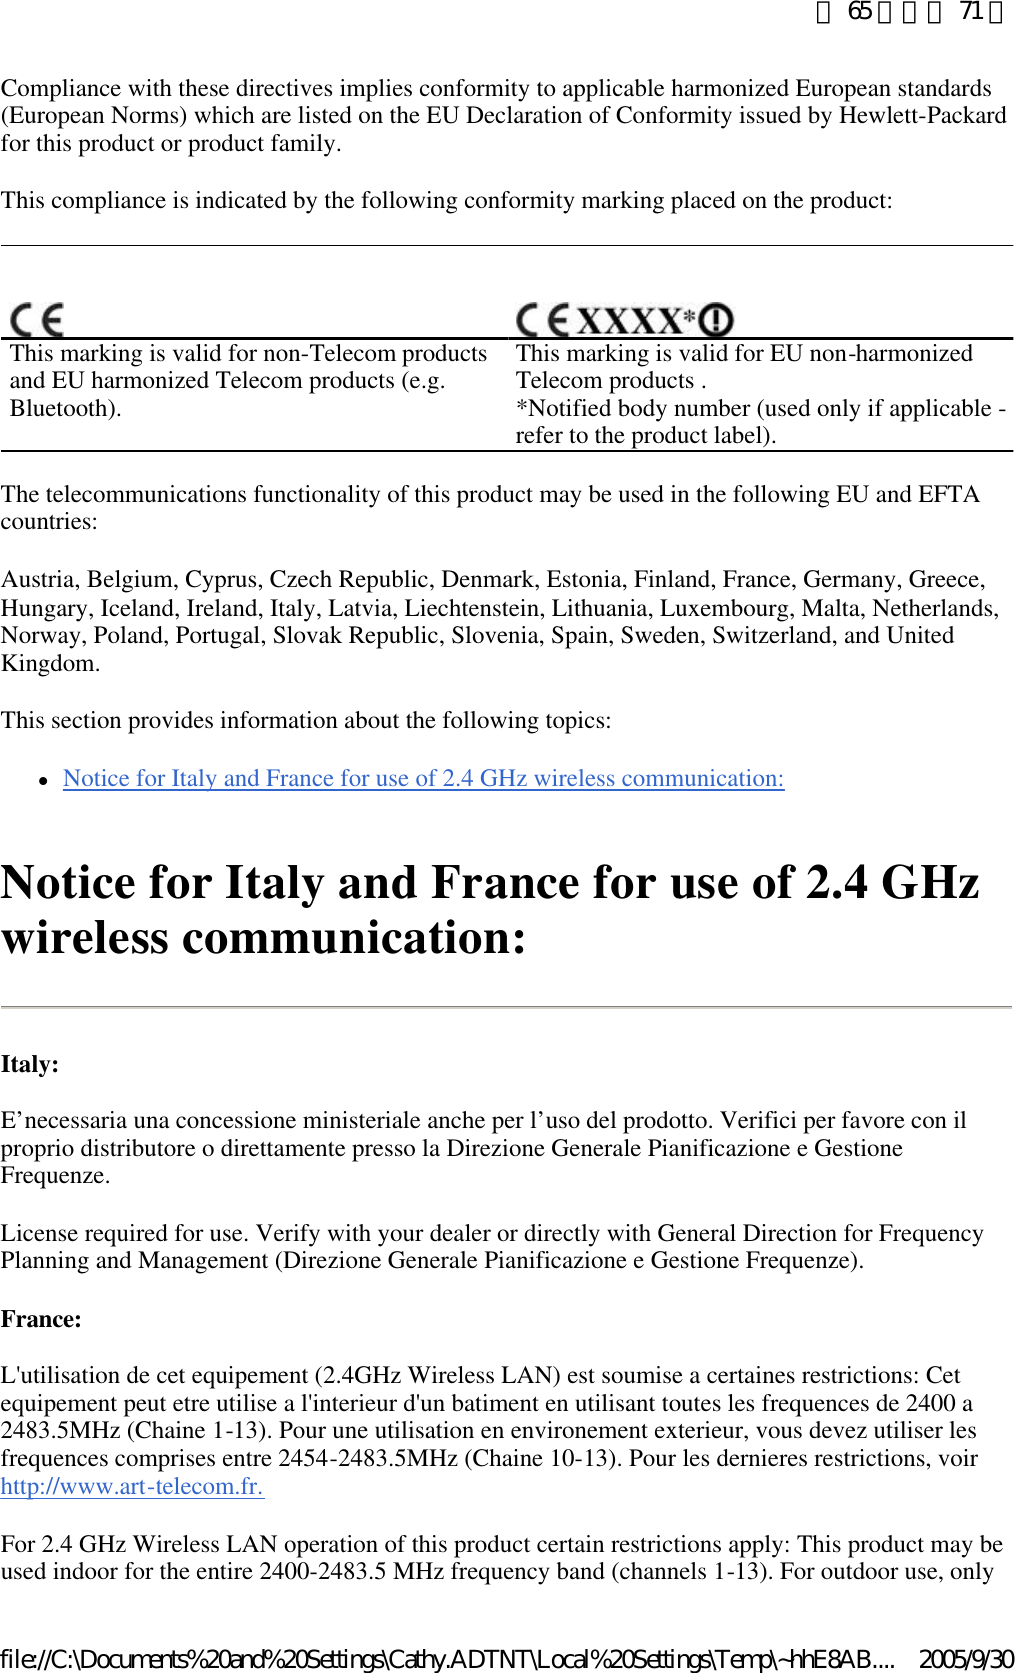 Compliance with these directives implies conformity to applicable harmonized European standards (European Norms) which are listed on the EU Declaration of Conformity issued by Hewlett-Packard for this product or product family.  This compliance is indicated by the following conformity marking placed on the product:  The telecommunications functionality of this product may be used in the following EU and EFTA countries:  Austria, Belgium, Cyprus, Czech Republic, Denmark, Estonia, Finland, France, Germany, Greece, Hungary, Iceland, Ireland, Italy, Latvia, Liechtenstein, Lithuania, Luxembourg, Malta, Netherlands, Norway, Poland, Portugal, Slovak Republic, Slovenia, Spain, Sweden, Switzerland, and United Kingdom.  This section provides information about the following topics:  lNotice for Italy and France for use of 2.4 GHz wireless communication:  Notice for Italy and France for use of 2.4 GHz wireless communication: Italy: E’necessaria una concessione ministeriale anche per l’uso del prodotto. Verifici per favore con il proprio distributore o direttamente presso la Direzione Generale Pianificazione e Gestione Frequenze.  License required for use. Verify with your dealer or directly with General Direction for Frequency Planning and Management (Direzione Generale Pianificazione e Gestione Frequenze).  France: L&apos;utilisation de cet equipement (2.4GHz Wireless LAN) est soumise a certaines restrictions: Cet equipement peut etre utilise a l&apos;interieur d&apos;un batiment en utilisant toutes les frequences de 2400 a 2483.5MHz (Chaine 1-13). Pour une utilisation en environement exterieur, vous devez utiliser les frequences comprises entre 2454-2483.5MHz (Chaine 10-13). Pour les dernieres restrictions, voir http://www.art-telecom.fr.  For 2.4 GHz Wireless LAN operation of this product certain restrictions apply: This product may be used indoor for the entire 2400-2483.5 MHz frequency band (channels 1-13). For outdoor use, only     This marking is valid for non-Telecom products and EU harmonized Telecom products (e.g. Bluetooth). This marking is valid for EU non-harmonized Telecom products . *Notified body number (used only if applicable - refer to the product label).  第 65 頁，共 71 頁2005/9/30file://C:\Documents%20and%20Settings\Cathy.ADTNT\Local%20Settings\Temp\~hhE8AB....